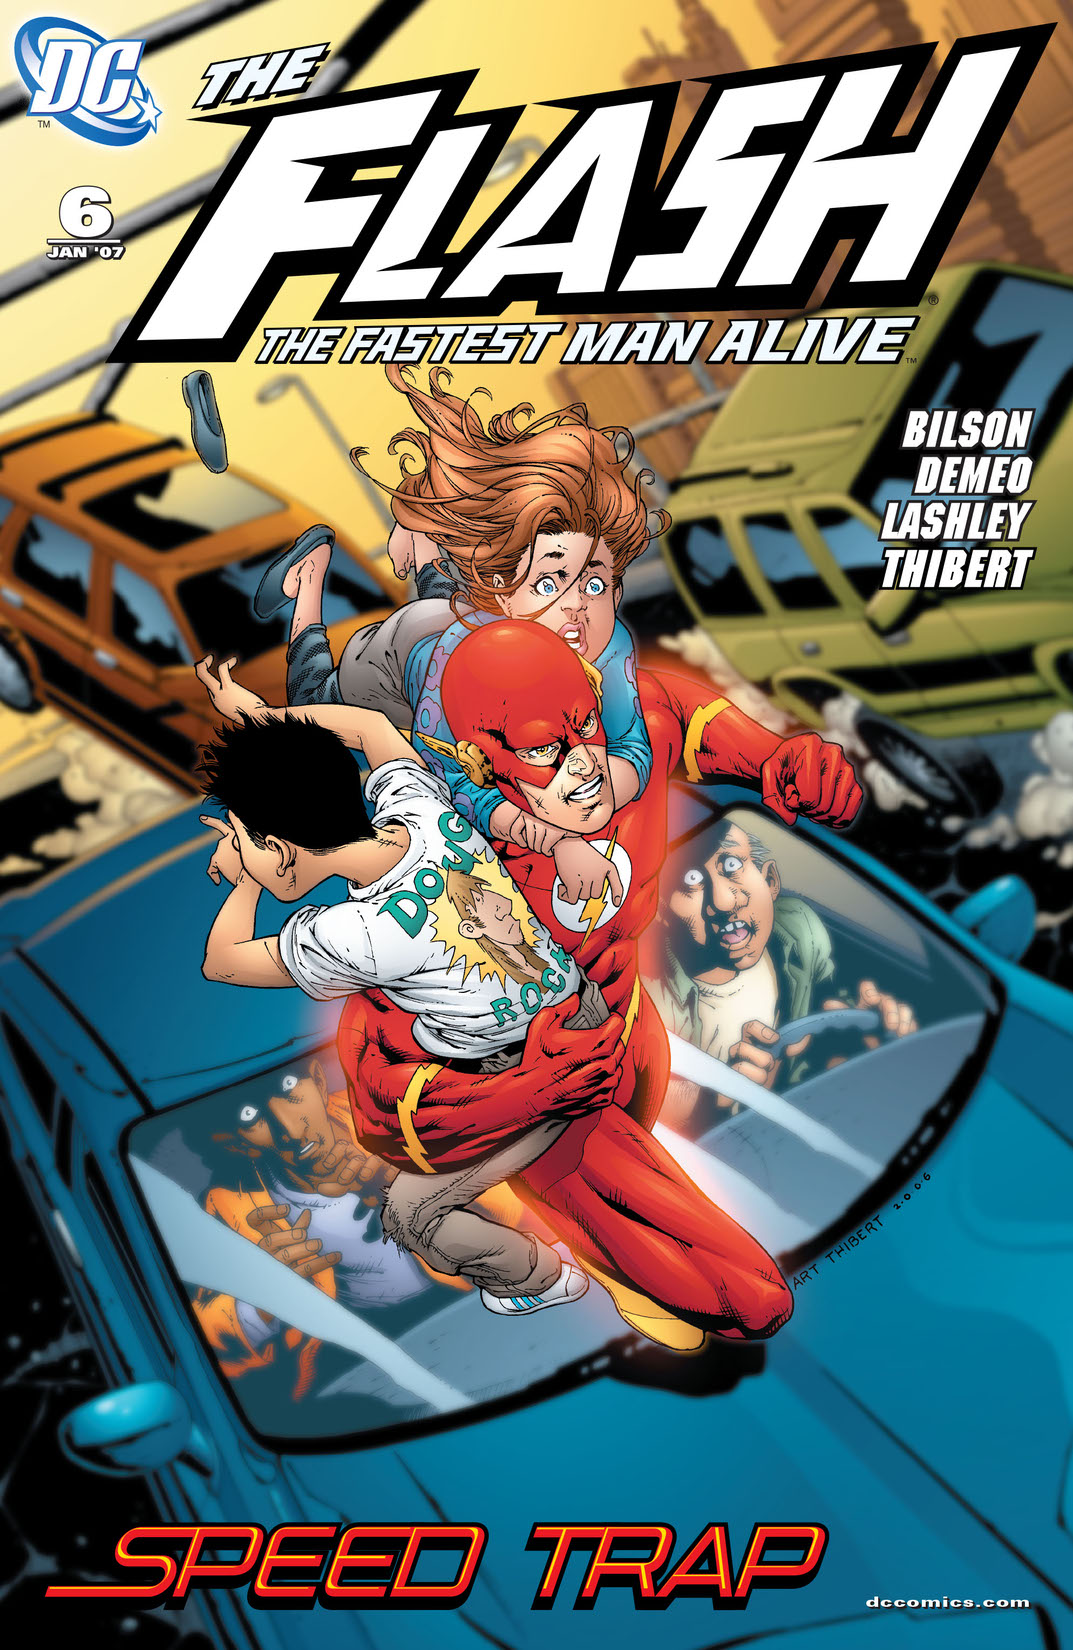 Flash: The Fastest Man Alive #6 preview images